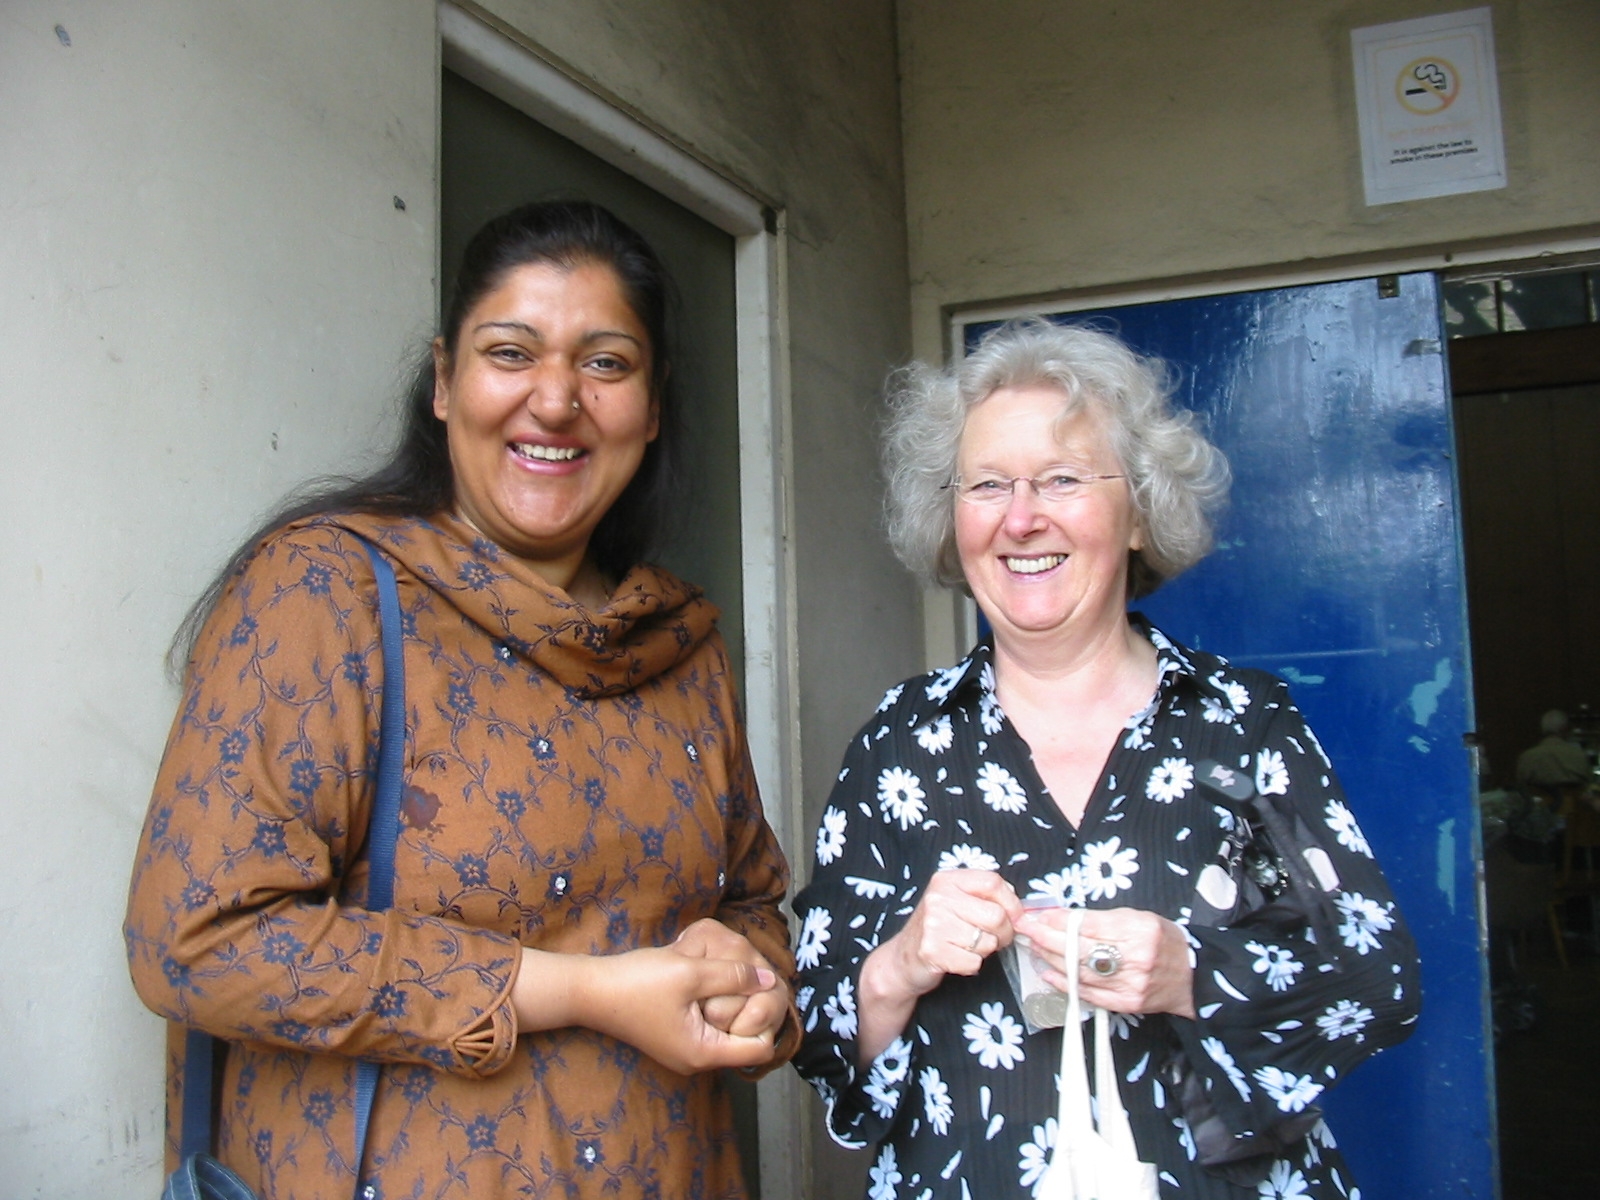 Cllr Samina Safdar meets a local resident during last year's successful Forest Ward by-election campaign.